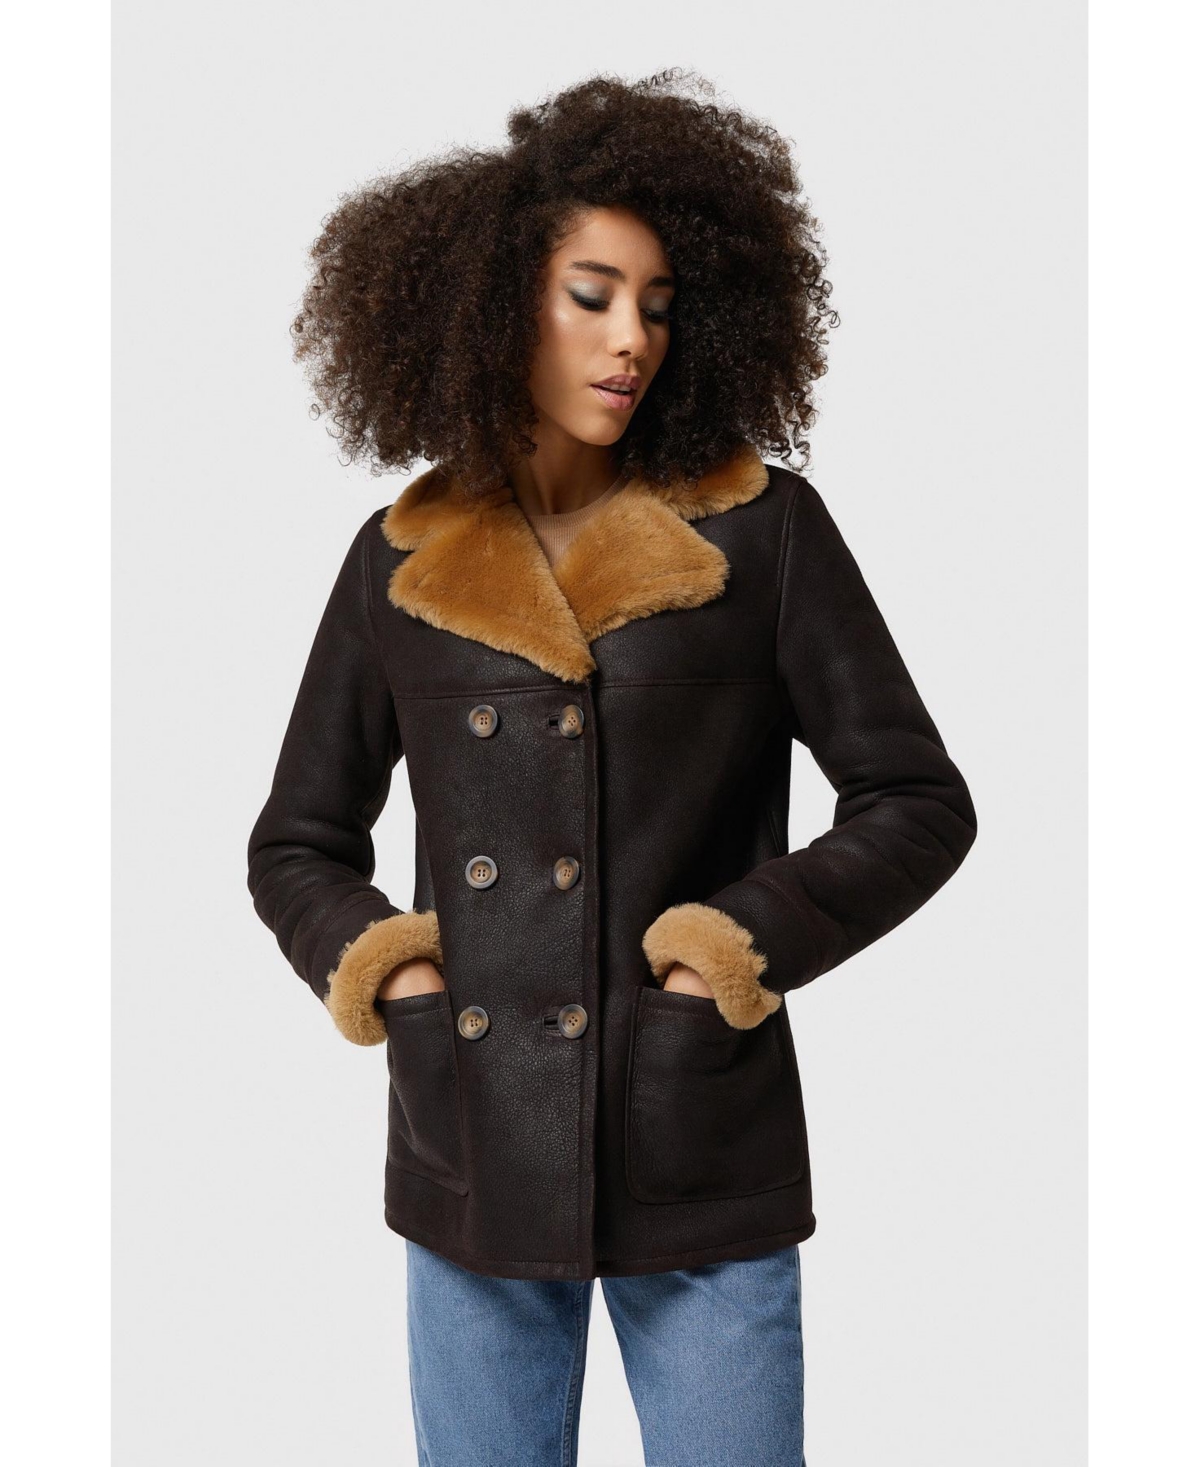 Women's Shearling Peacoat, Washed Brown with Ginger Wool - Brown